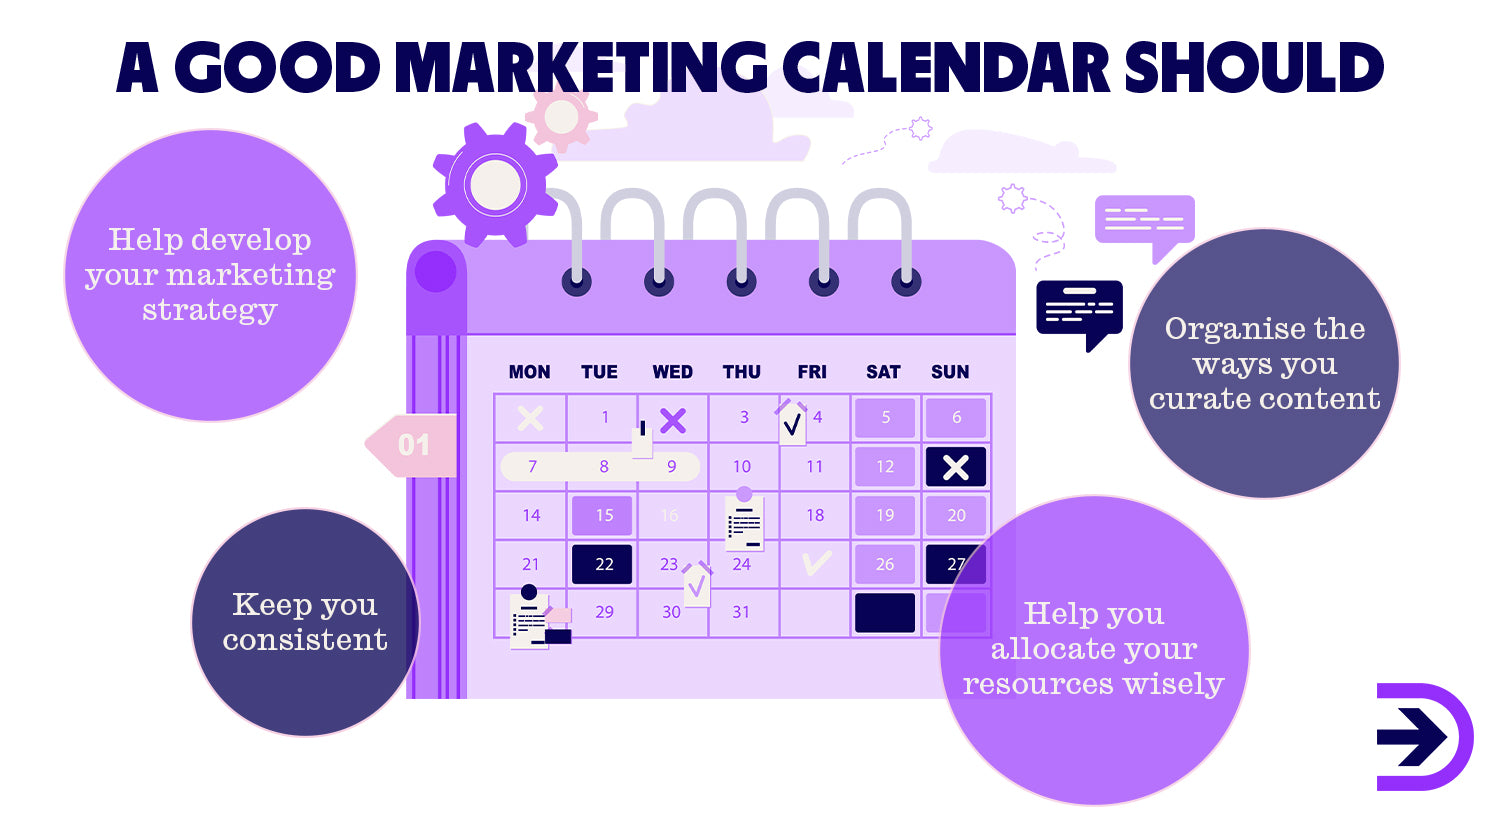 A good marketing calendar should keep your brand consistent, allocate your resources wisely and help you develop your marketing strategy.